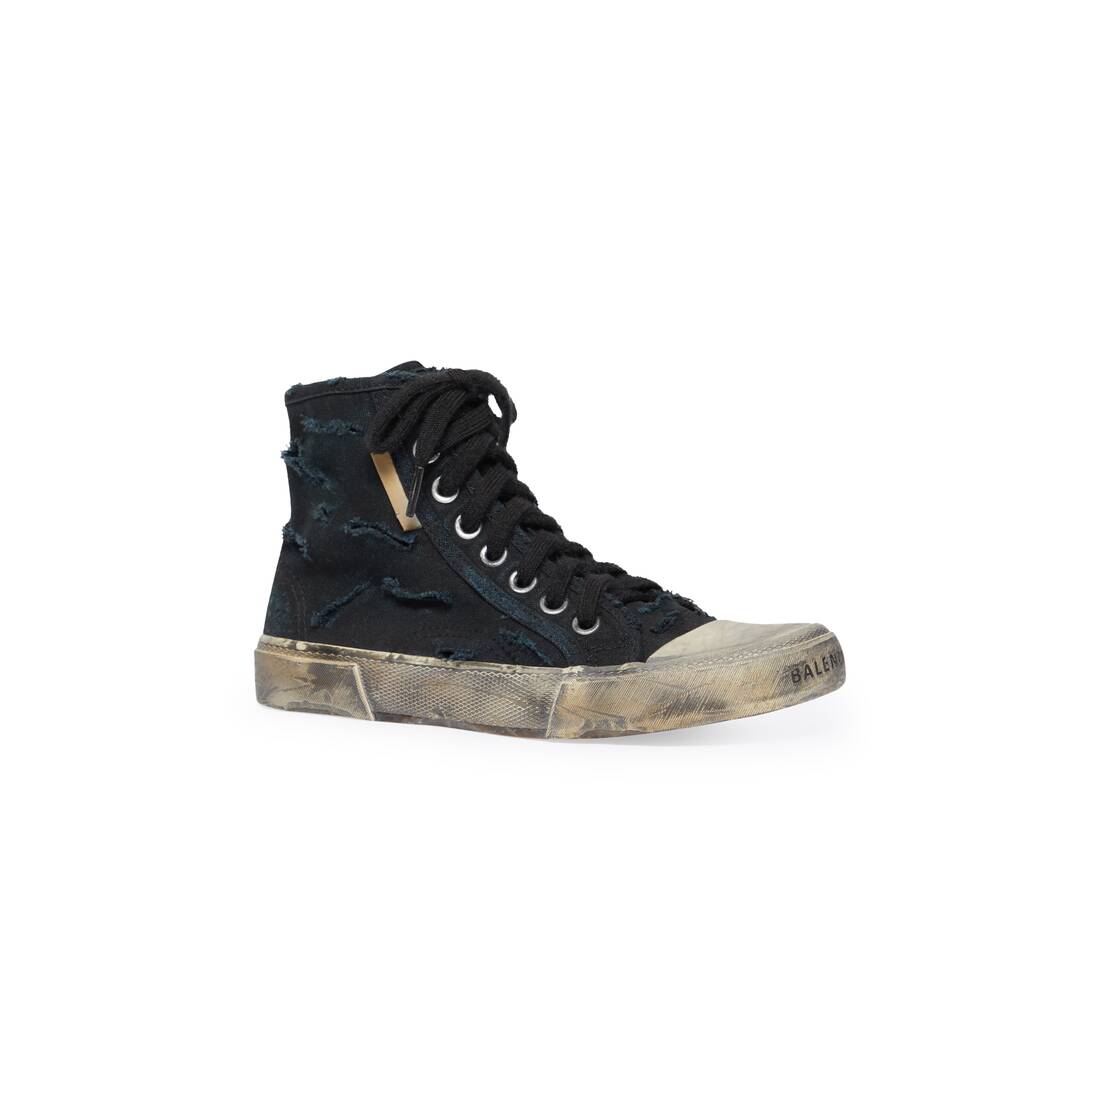 limited edition - paris high top trainers full destroyed